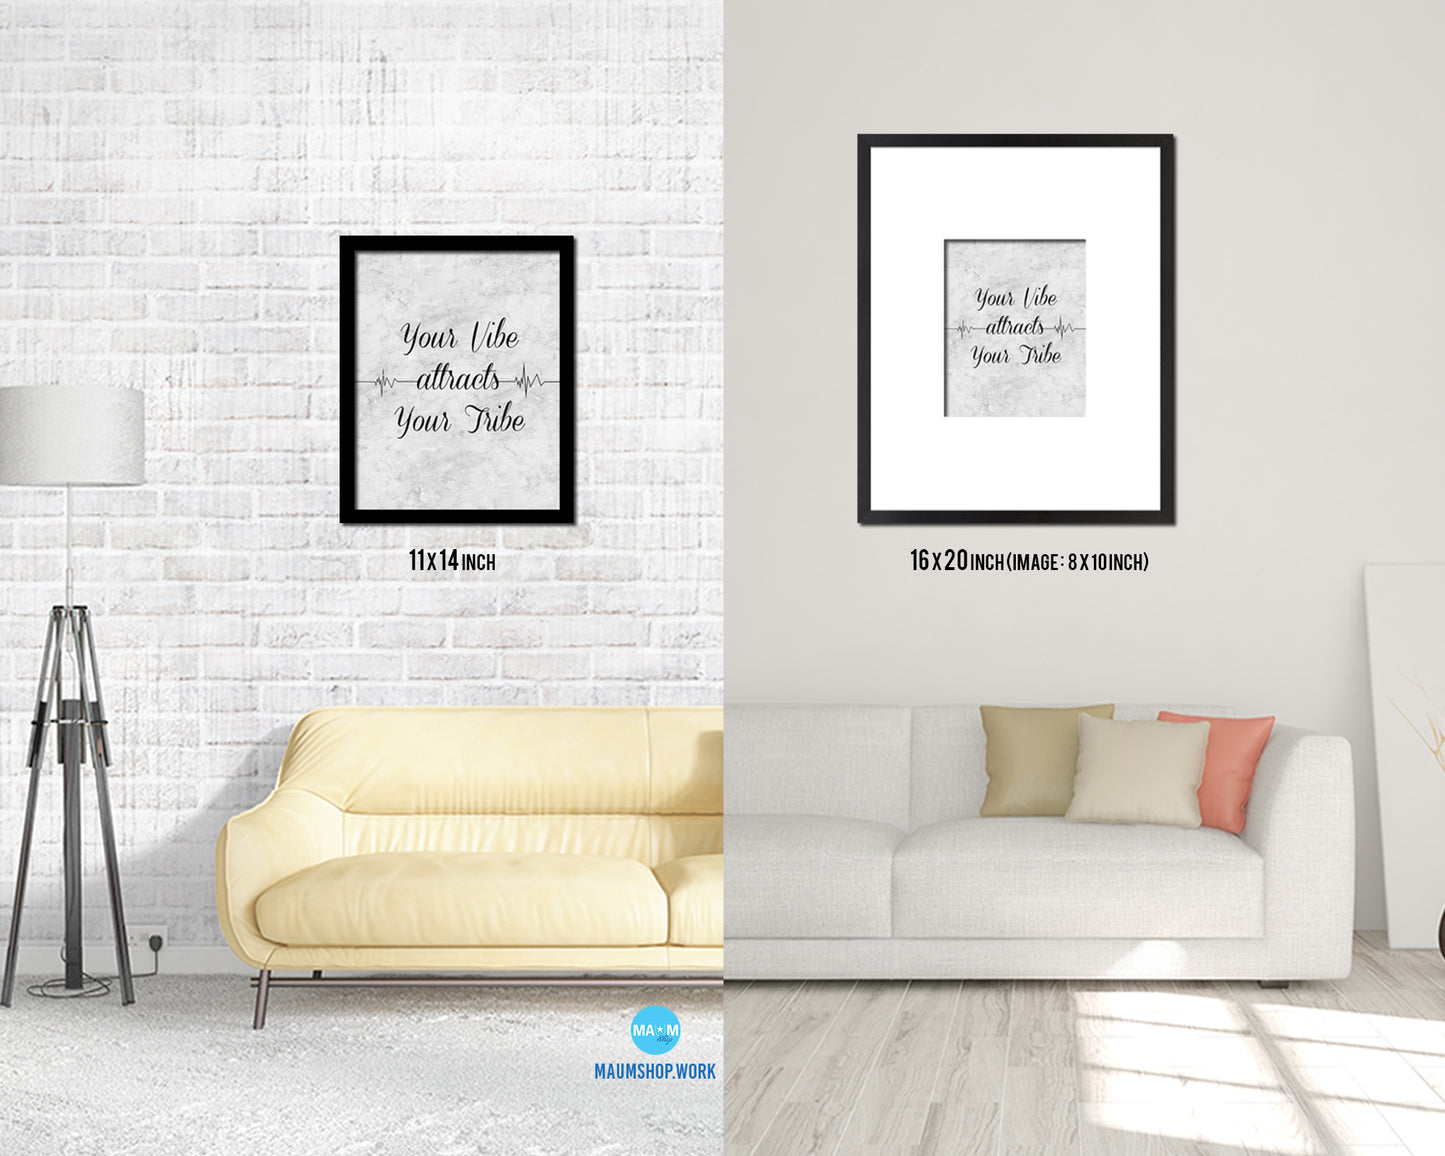 Your vibe attracts your tribe Quote Framed Print Wall Art Decor Gifts